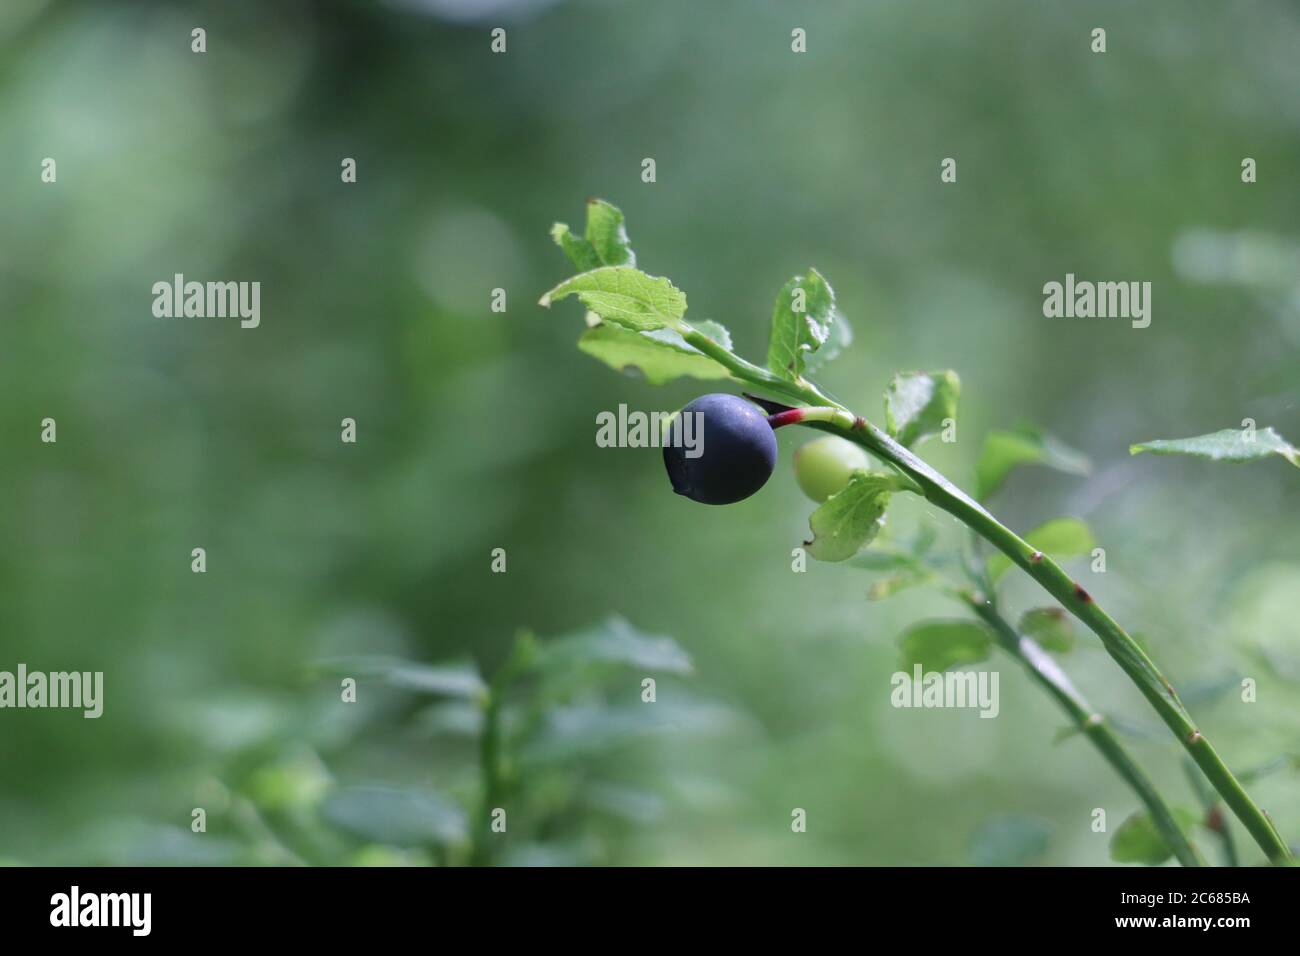 single wild berry attached to plant surrounded by green foliage  Stock Photo